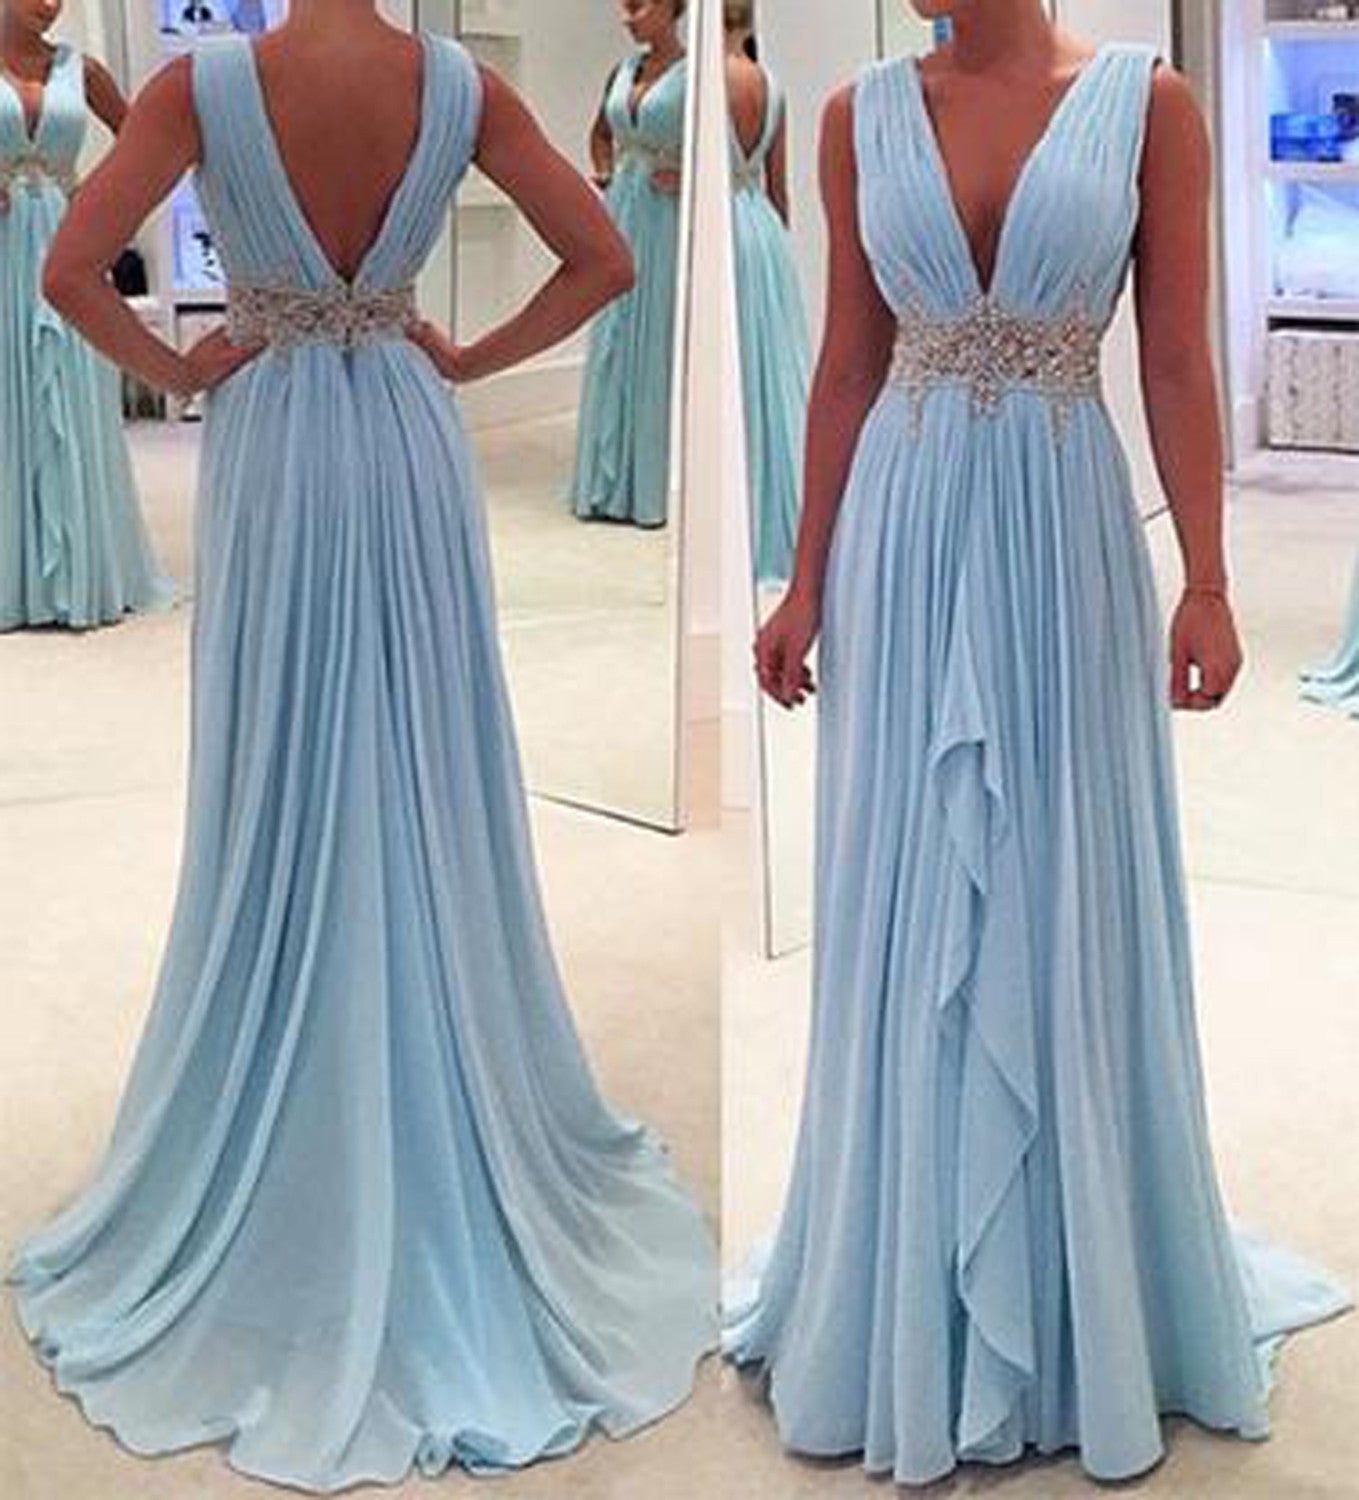 2017 Prom Dresses Ideas that Will Have All Eyes on You – MyBodiArt